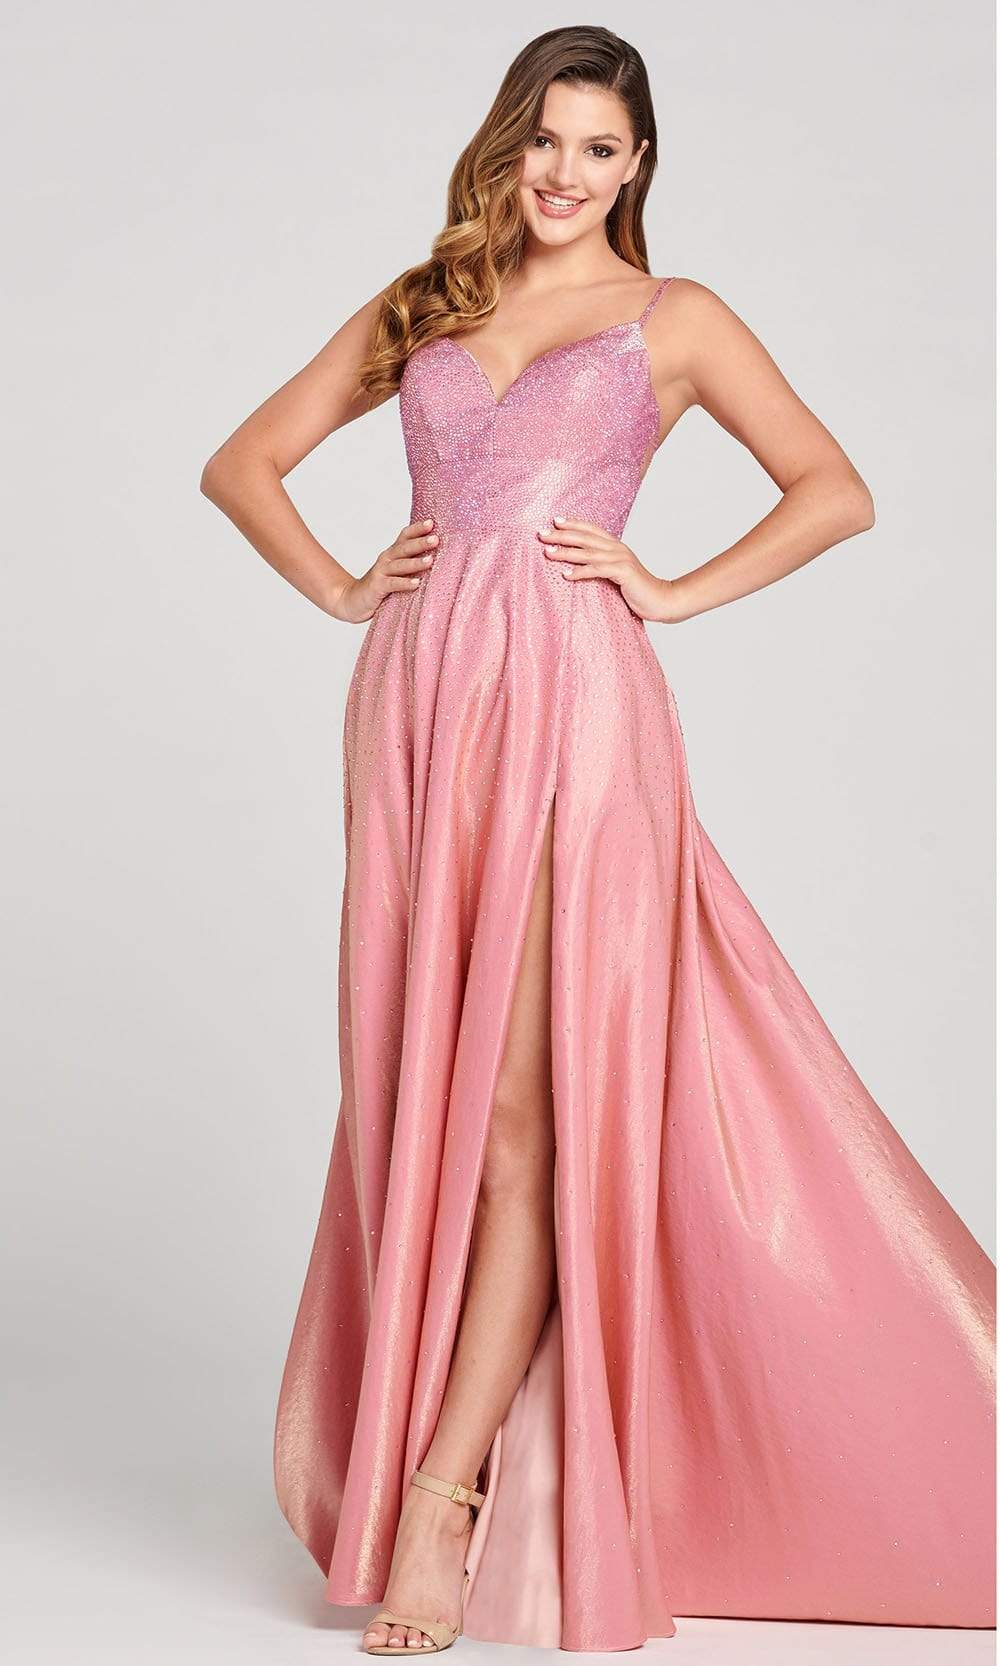 Ellie Wilde - EW121001 Strappy Open Back Crystal Studded Satin Gown Prom Dresses 00 / Pink Lemonade